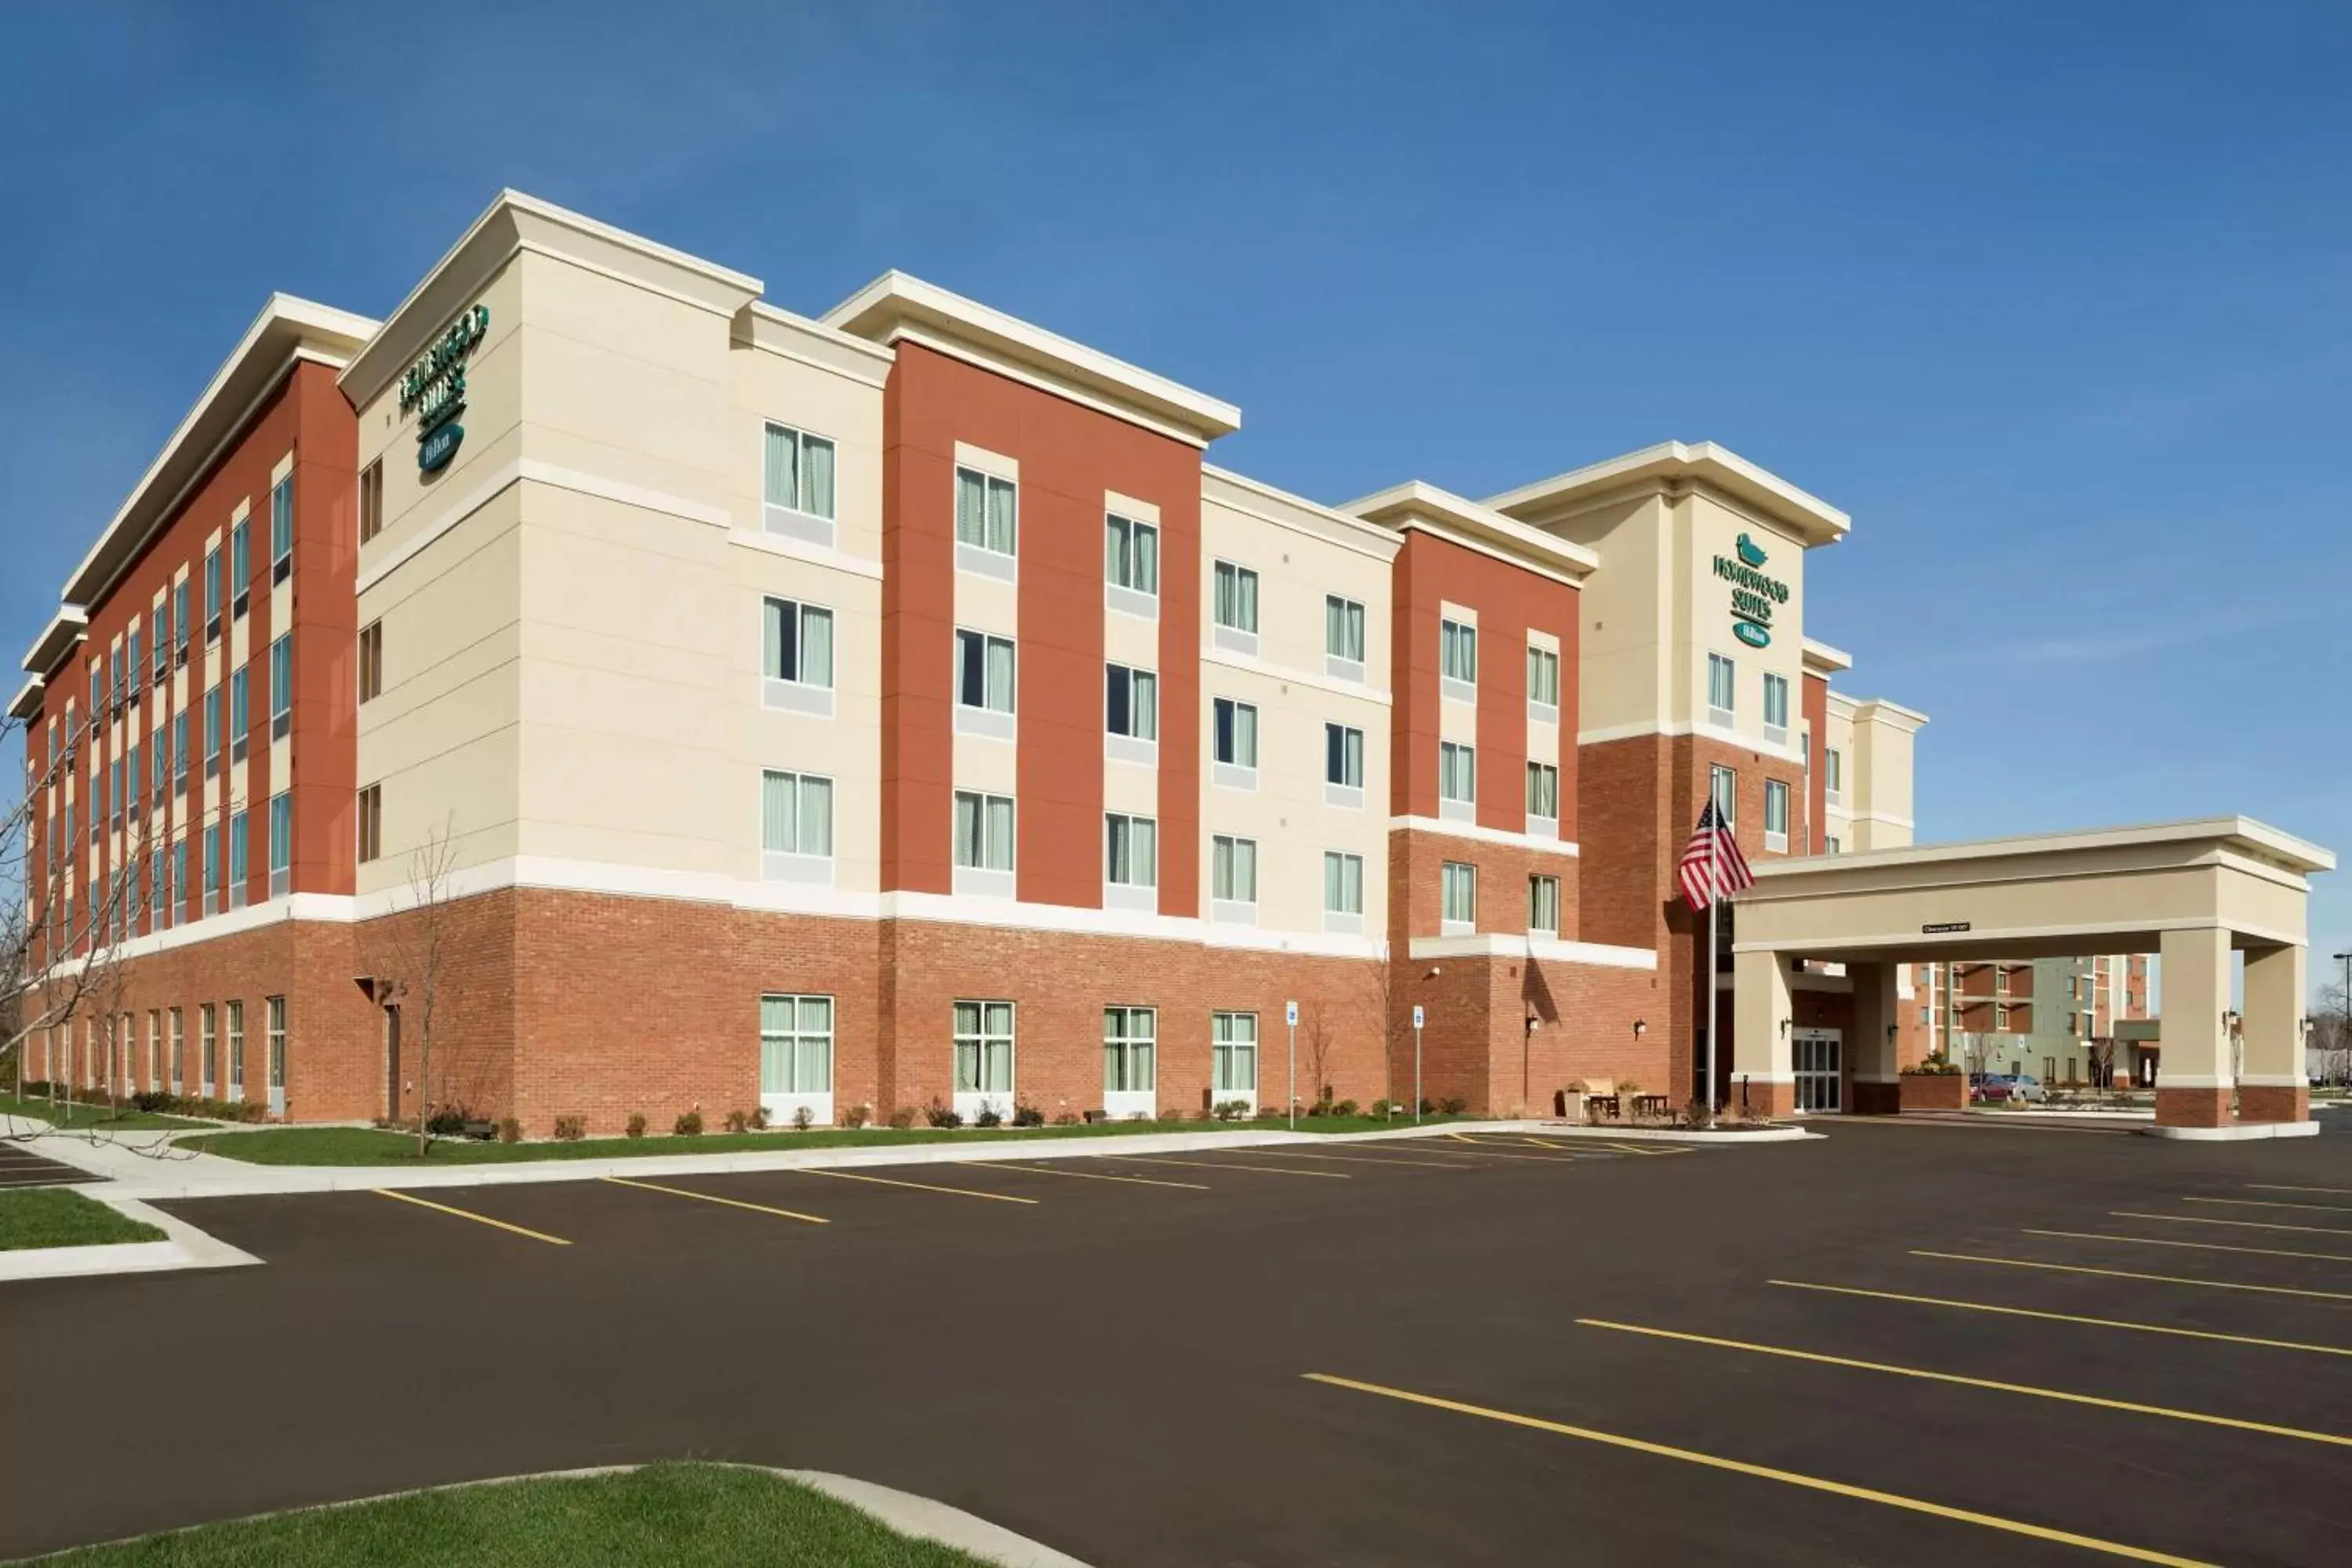 Property Building in Homewood Suites by Hilton Kalamazoo-Portage